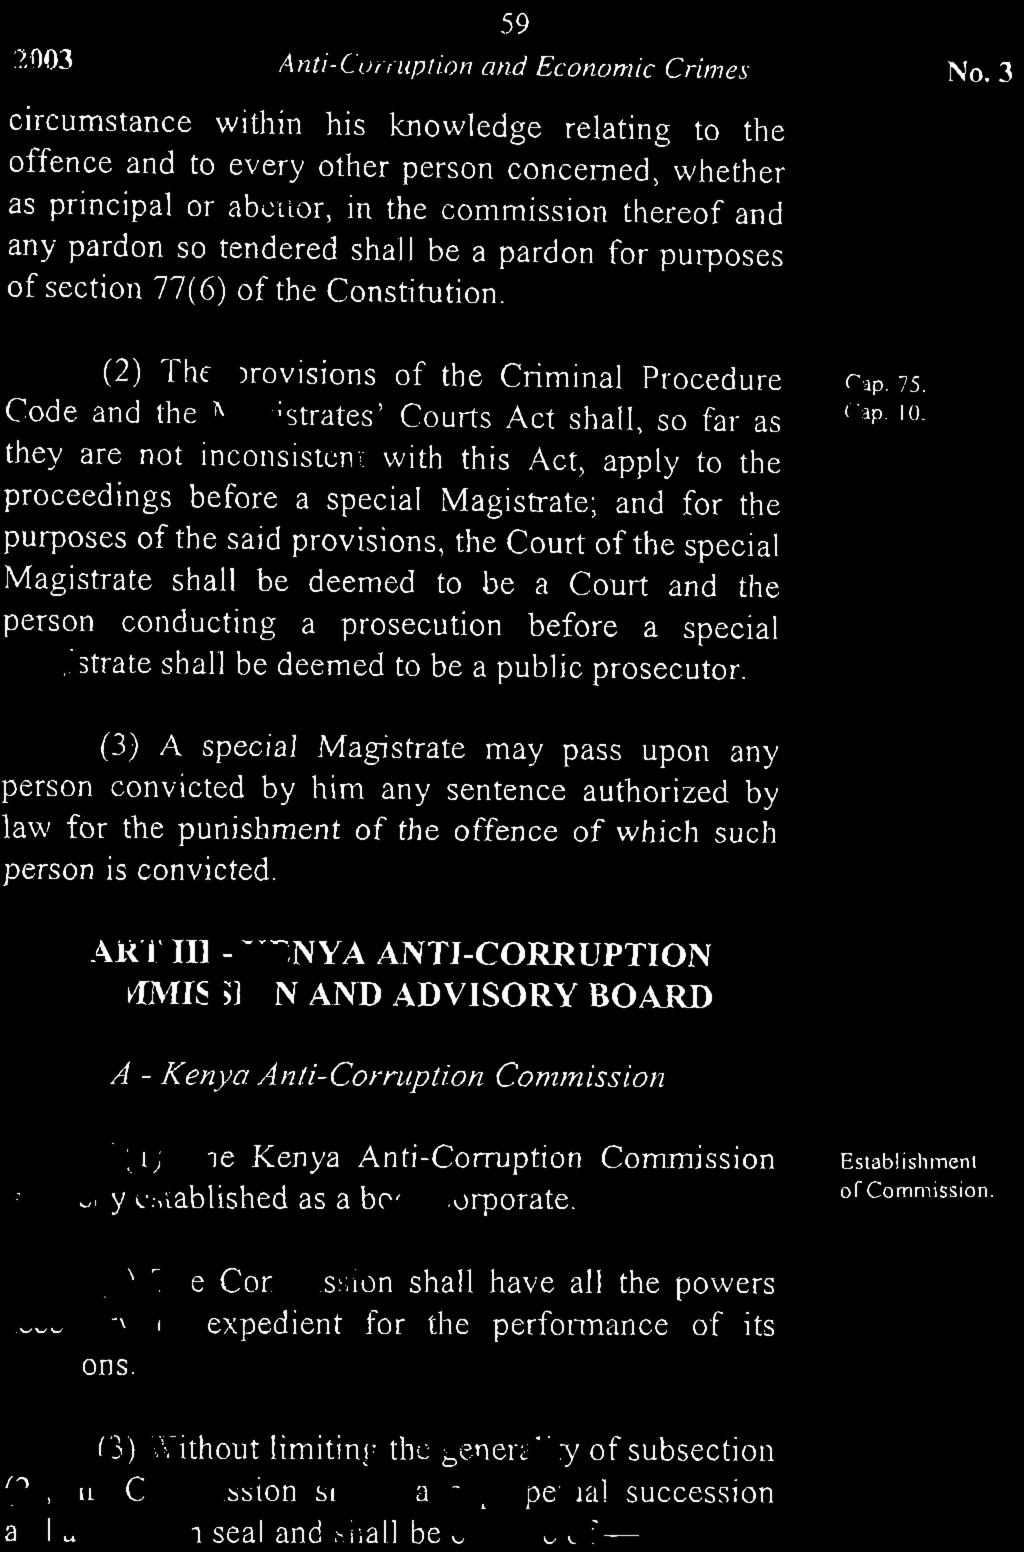 they are not inconsistent with this Act, apply to the proceedings before a special Magistrate; and for the purposes of the said provisions, the Court of the special Magistrate shall be deemed to be a